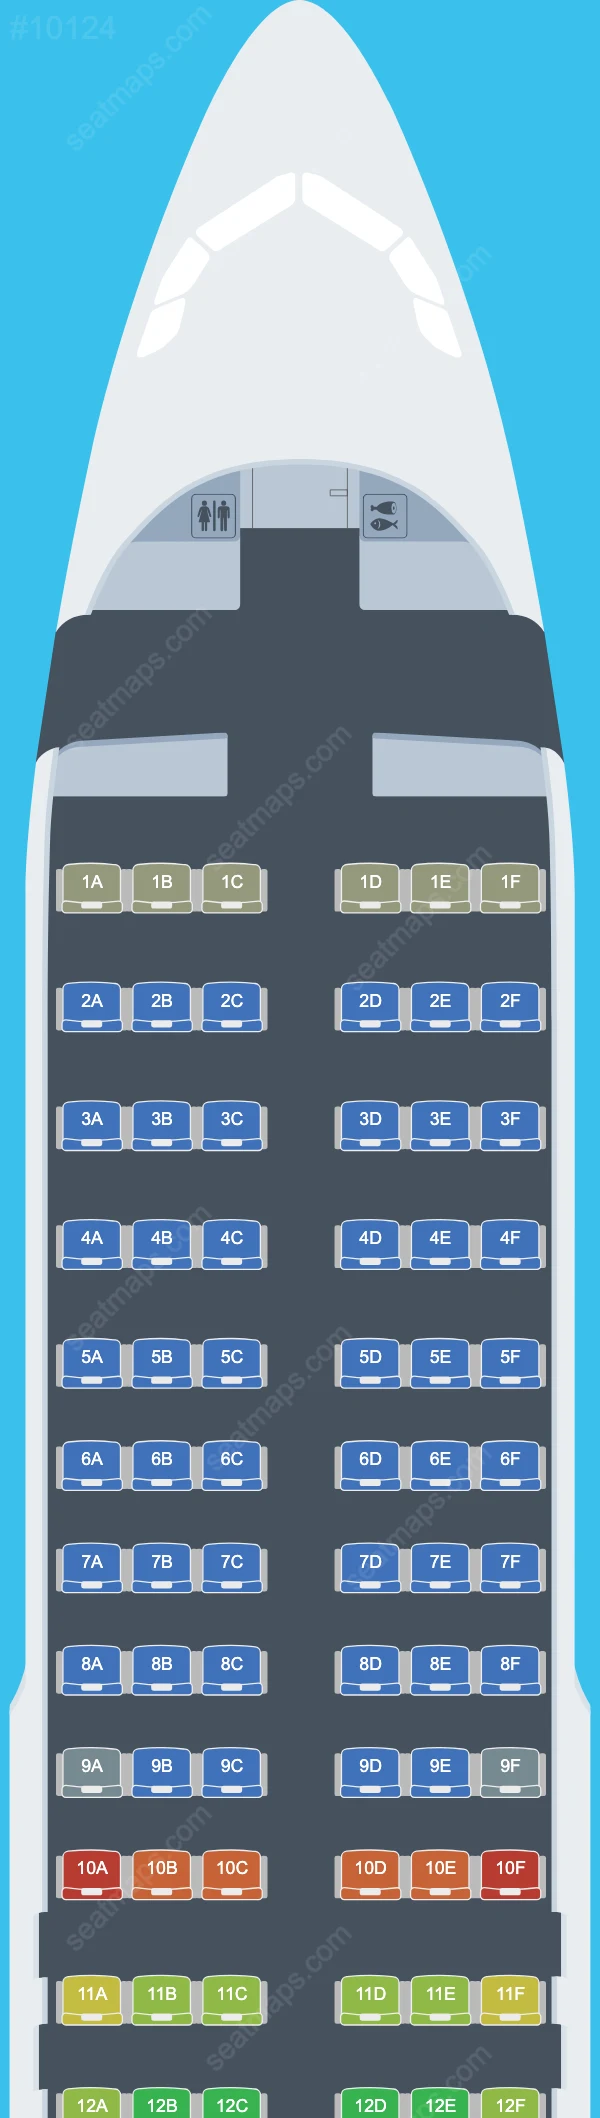 LATAM Airlines Brasil Airbus A320 Seat Maps A320-200neo V.2